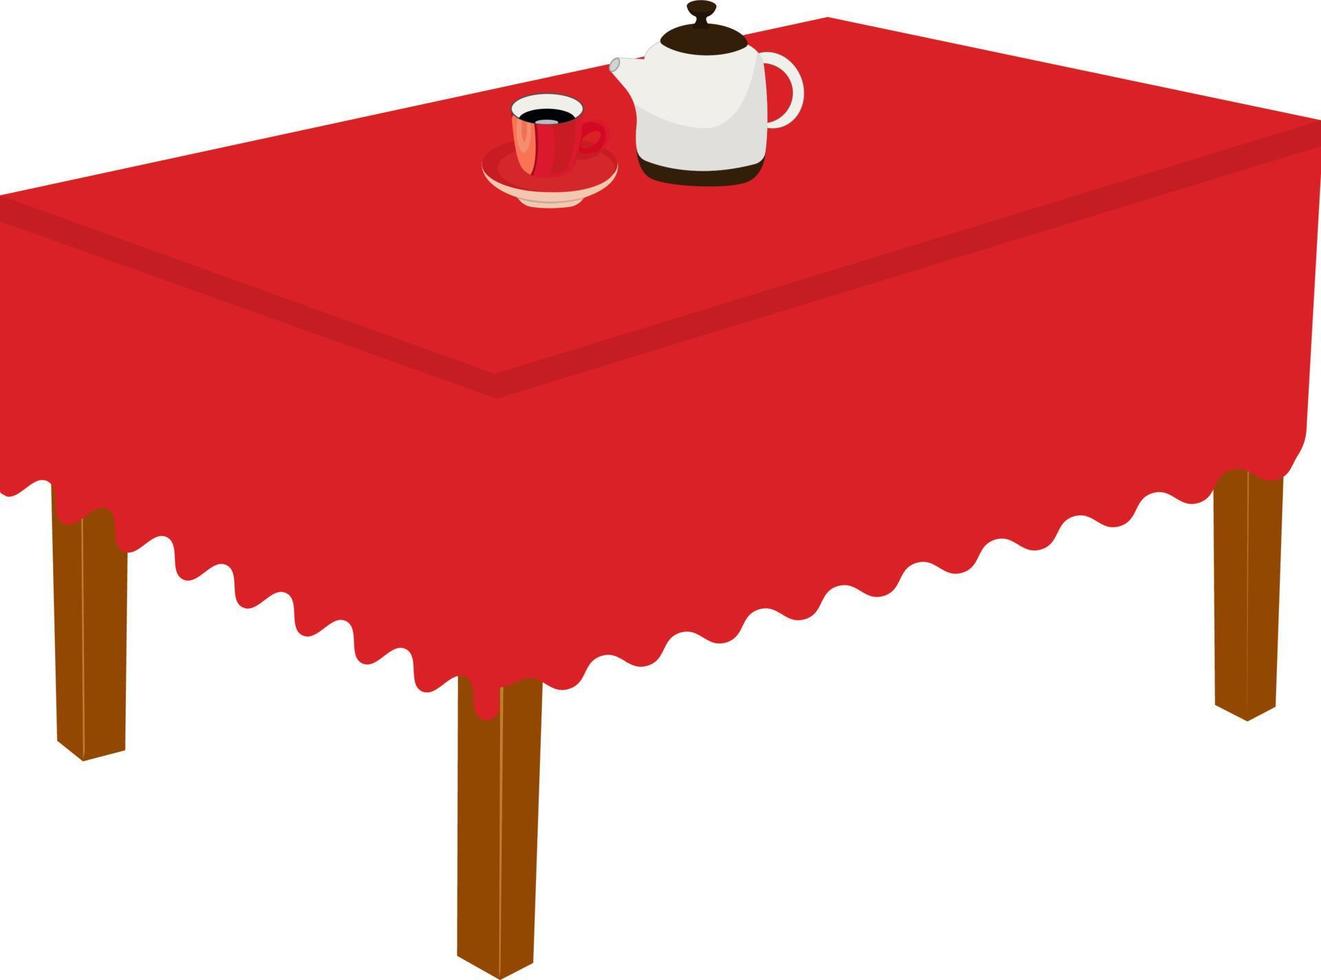 Red table cloth, illustration, vector on white background